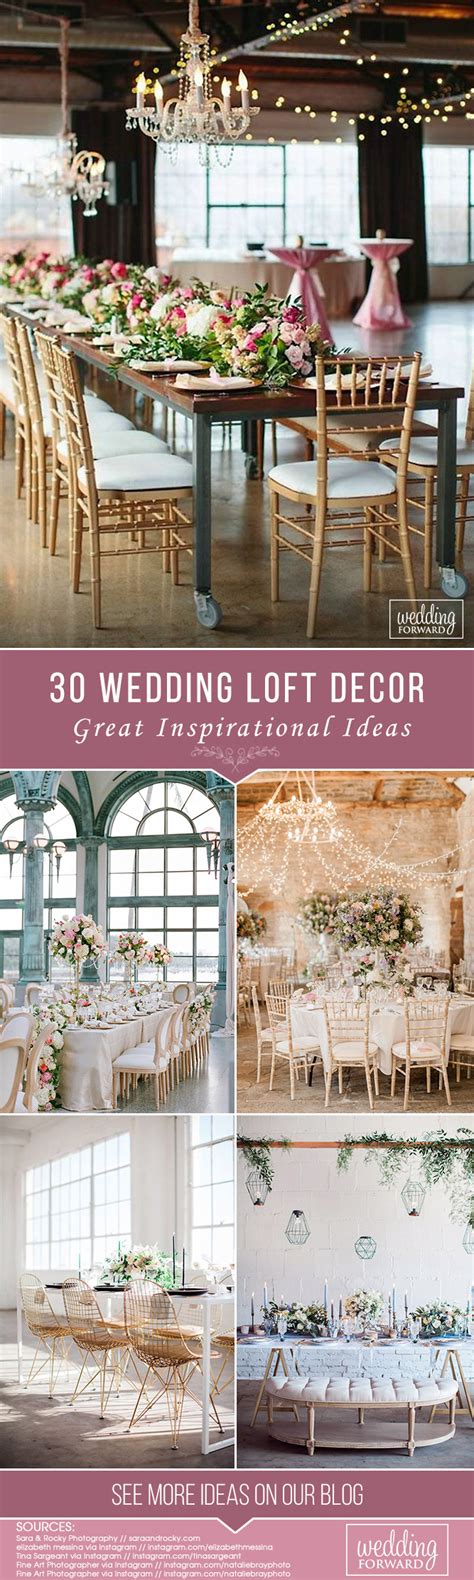 Space saving loft beds and loft storage ideas so not need to destroy the arrangement of the small spaces, but maximize the small spaces. 30 Lovely Wedding Loft Decorating Ideas | Loft decor ...